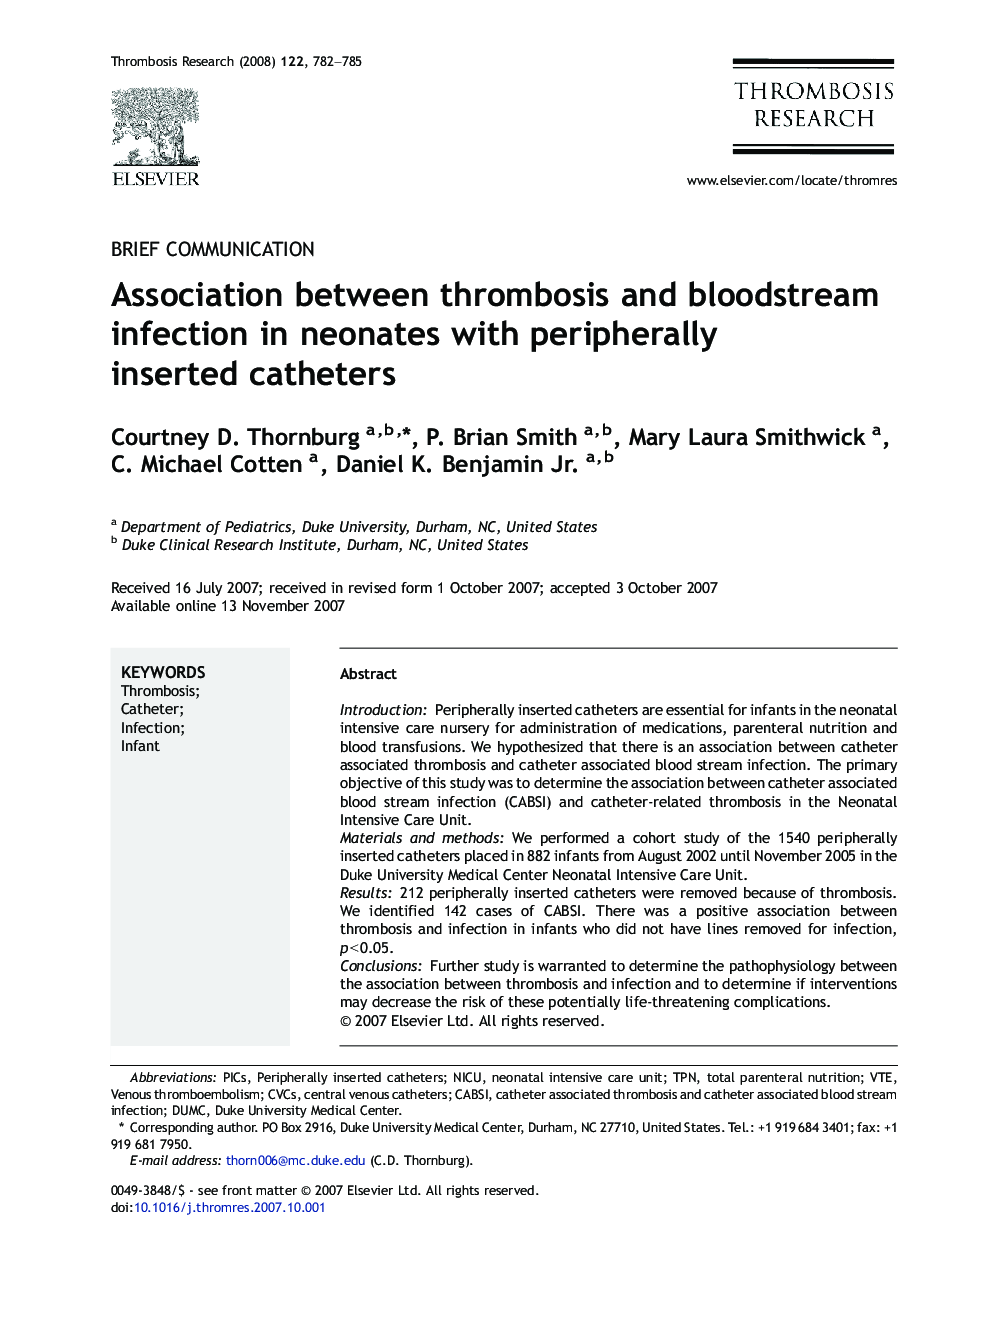 Association between thrombosis and bloodstream infection in neonates with peripherally inserted catheters